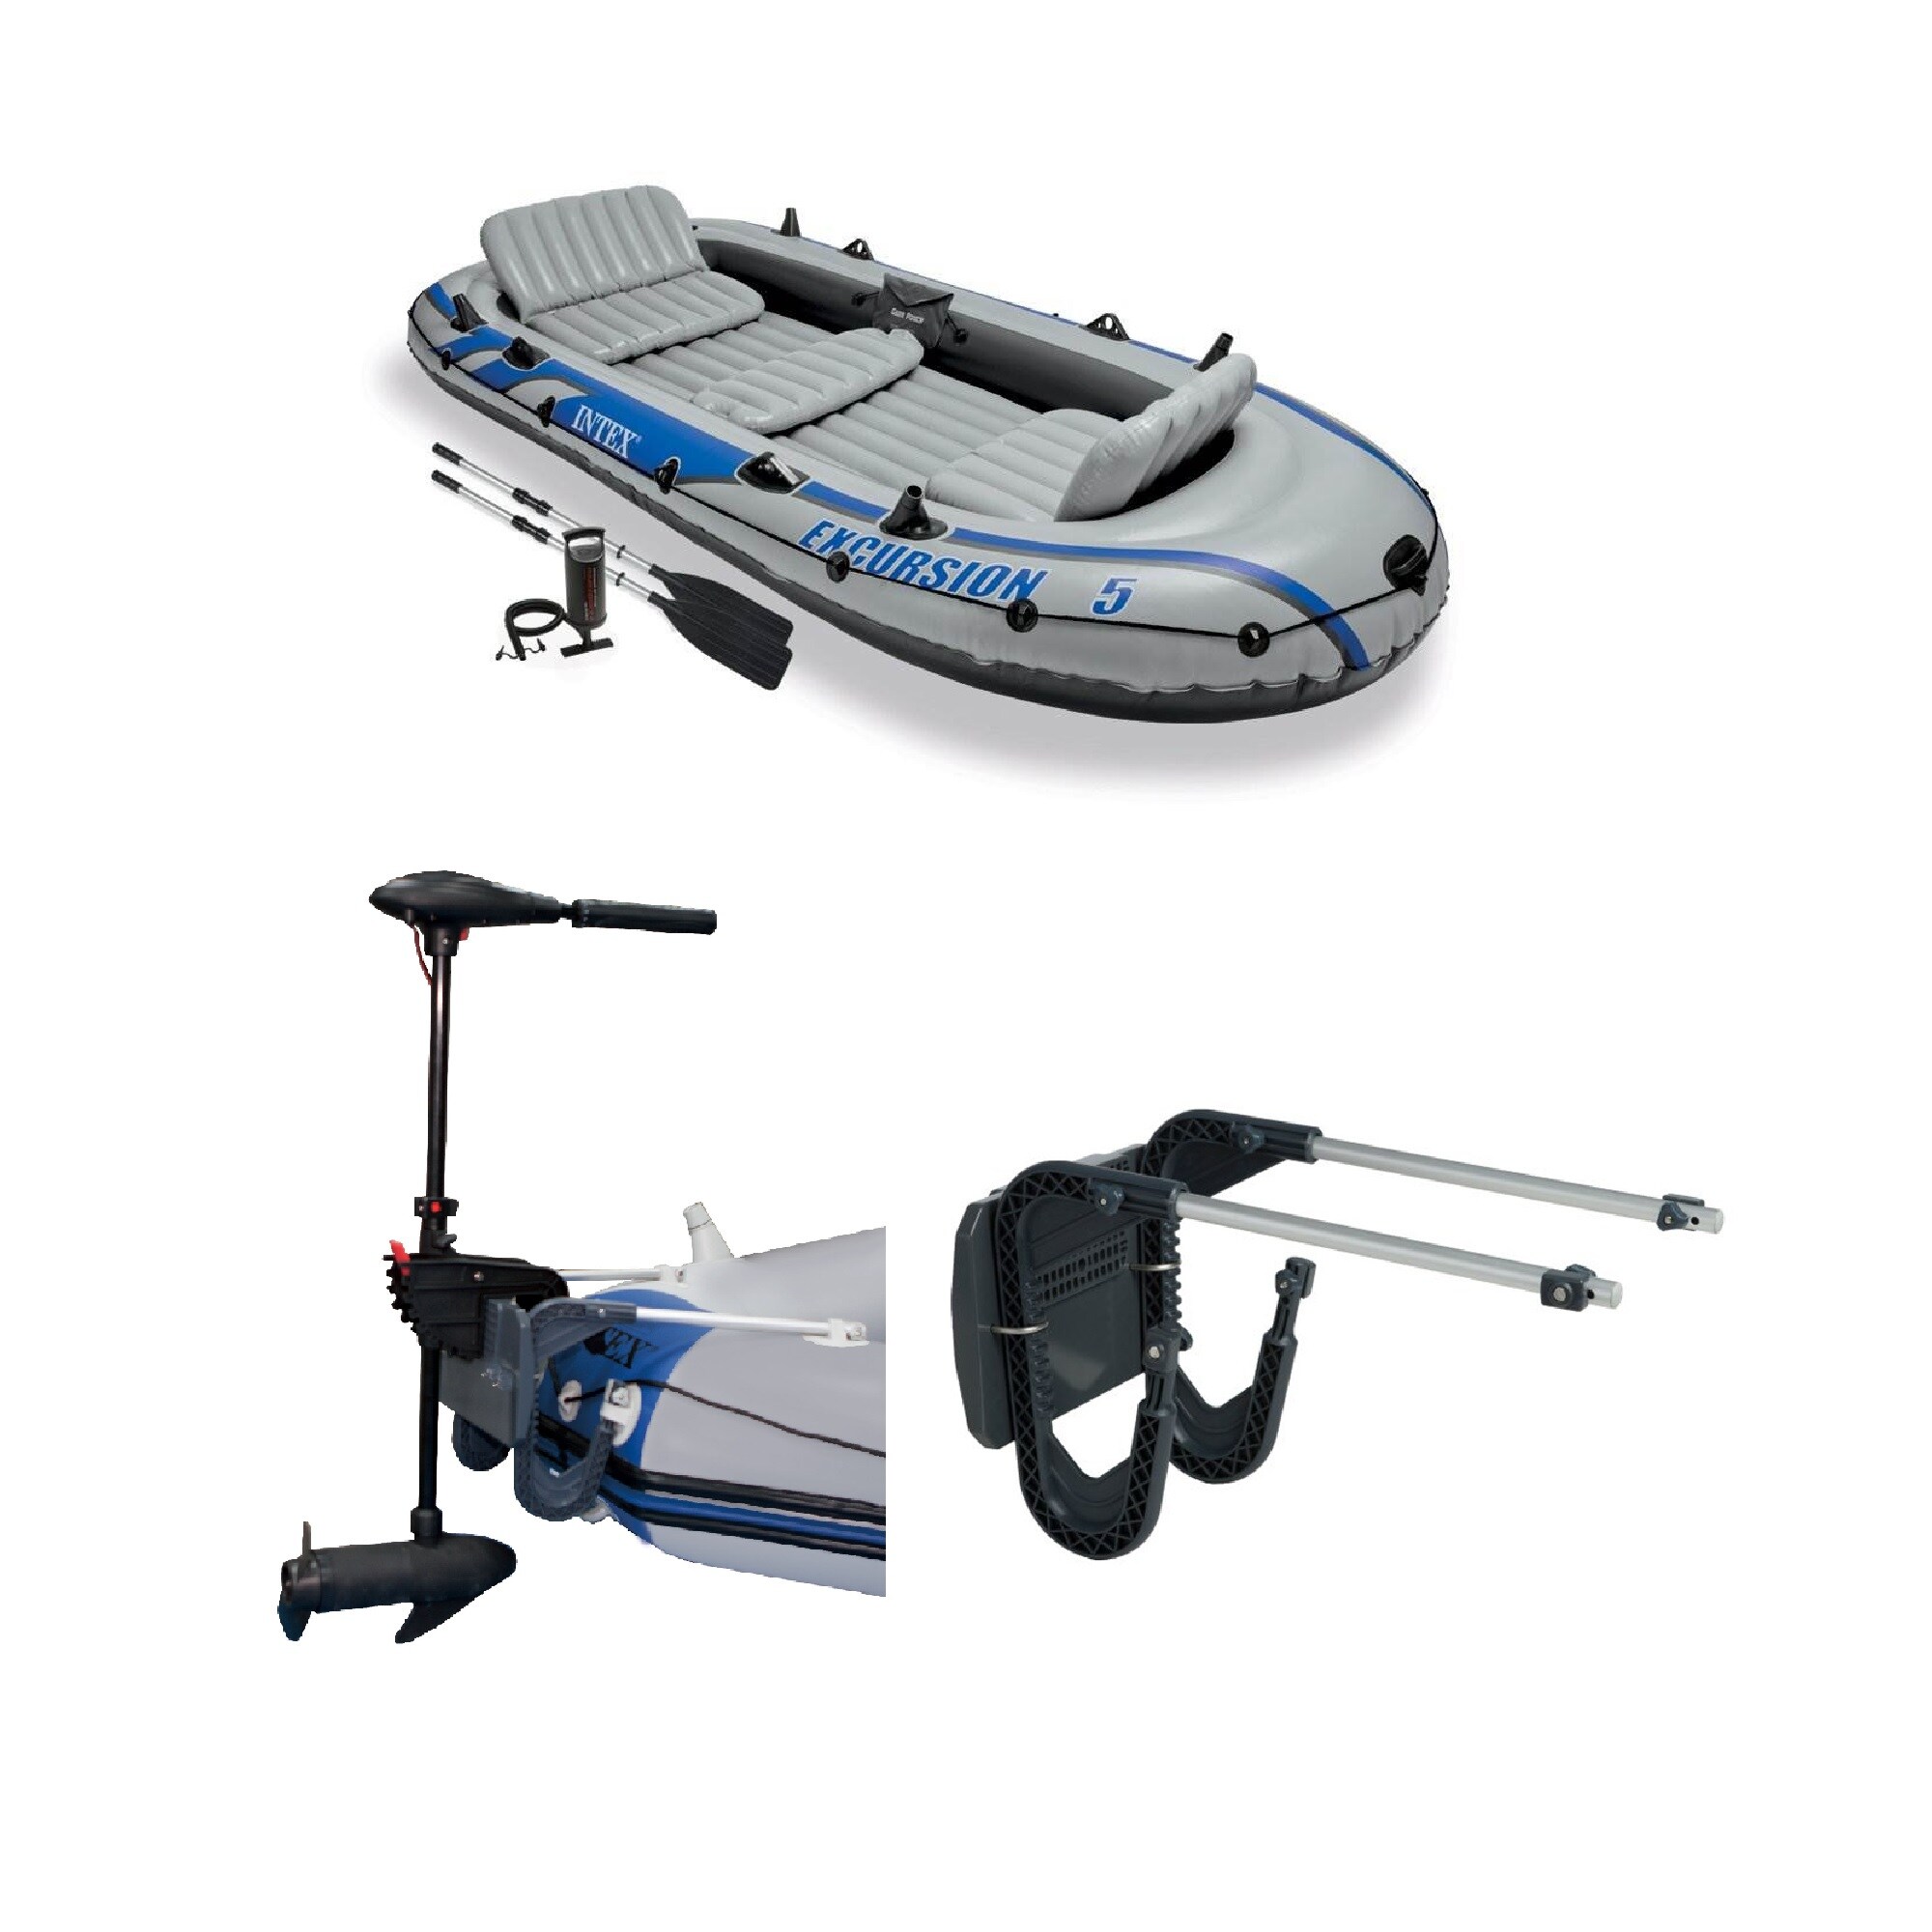 Intex Excursion 5 Inflatable Boat Set & 2 Transom Mount 8 Speed Trolling Motors 